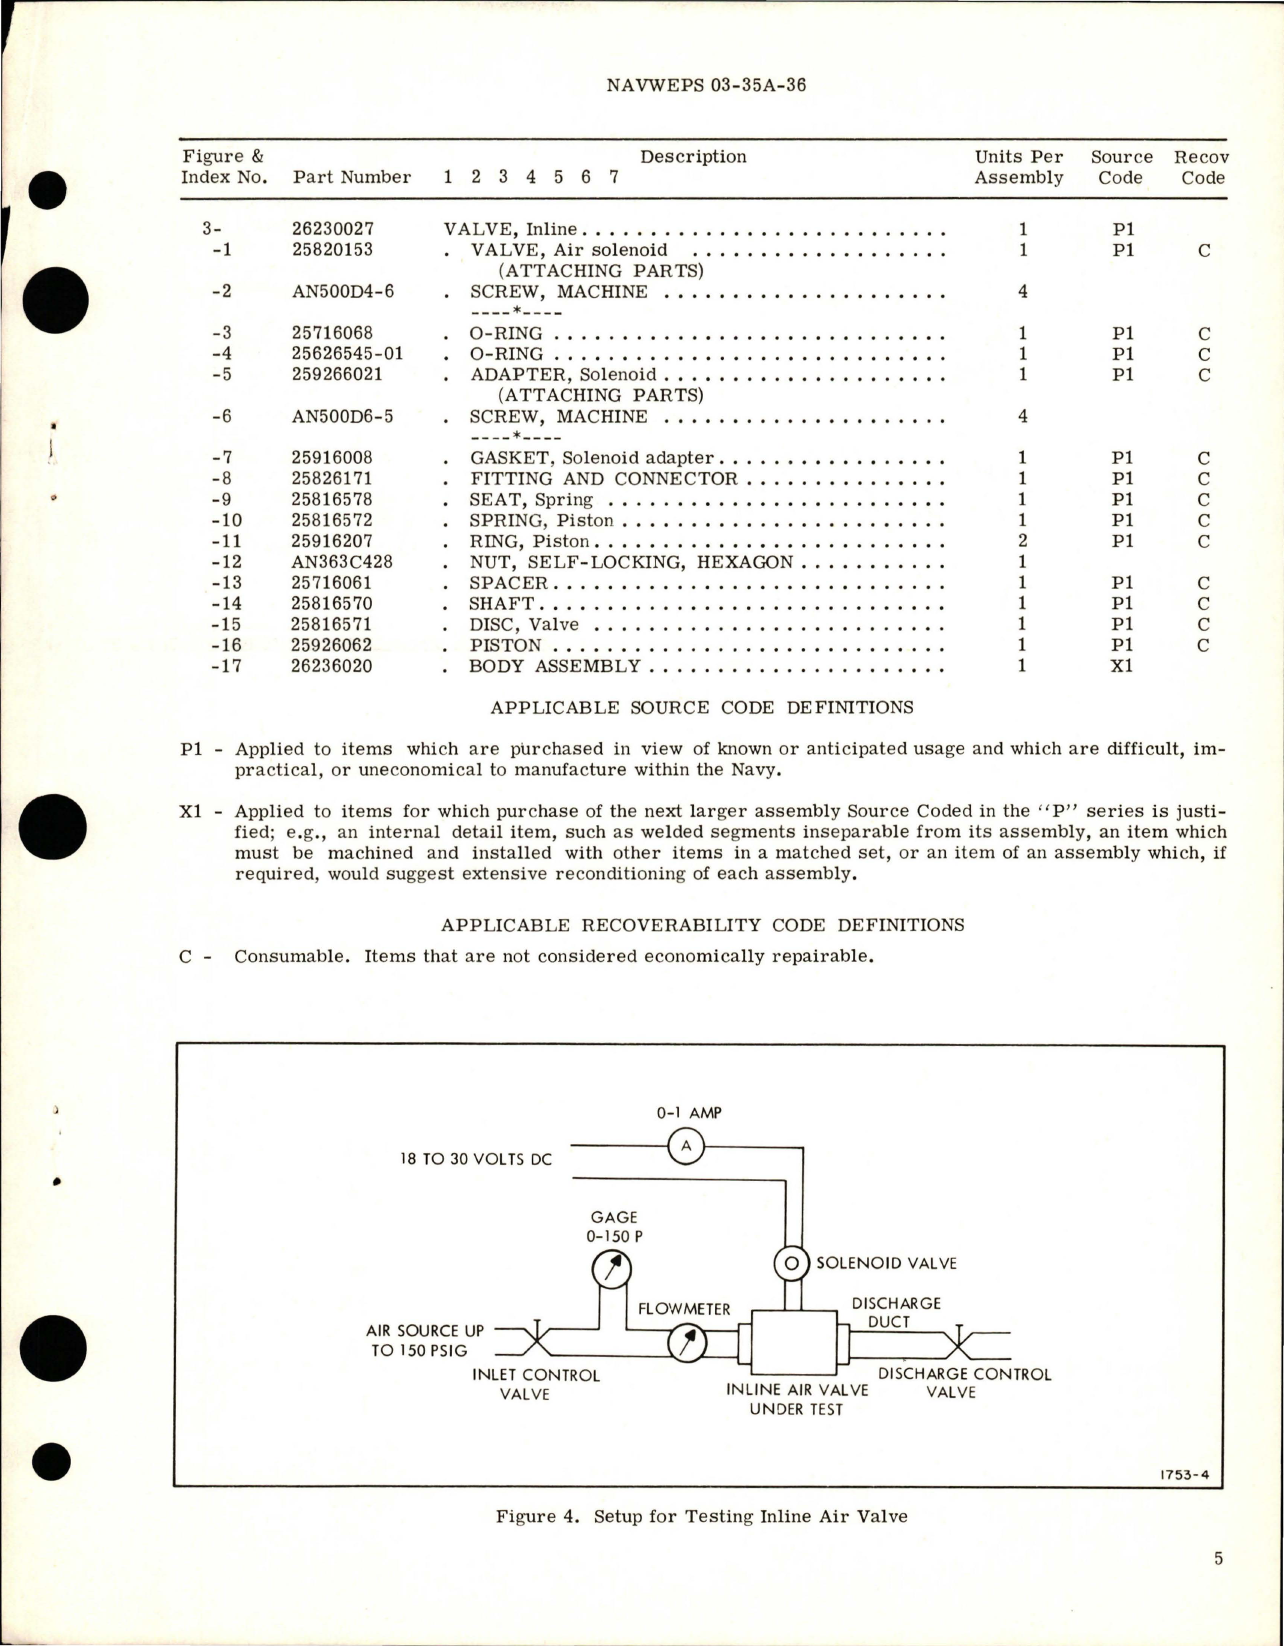 Sample page 5 from AirCorps Library document: Overhaul Instructions with Illustrated Parts Breakdown for 1 Inch Inline Valve - Part 26230027 